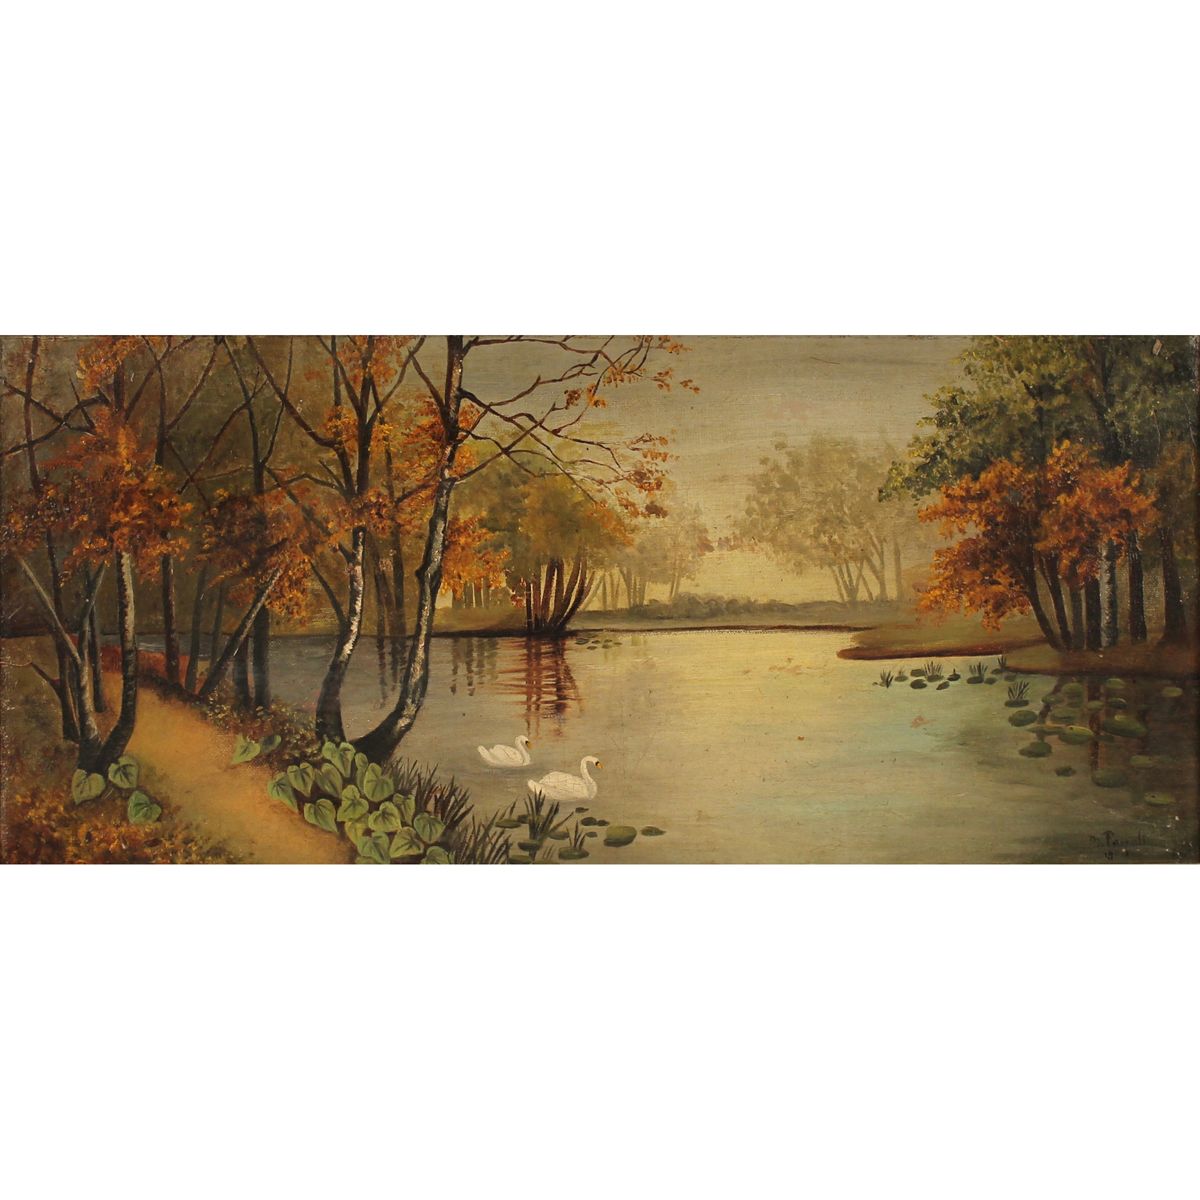 STAGNO CON CIGNI - POND WITH SWANS Oil painting on canvas in frame. Dated 1900. &hellip;